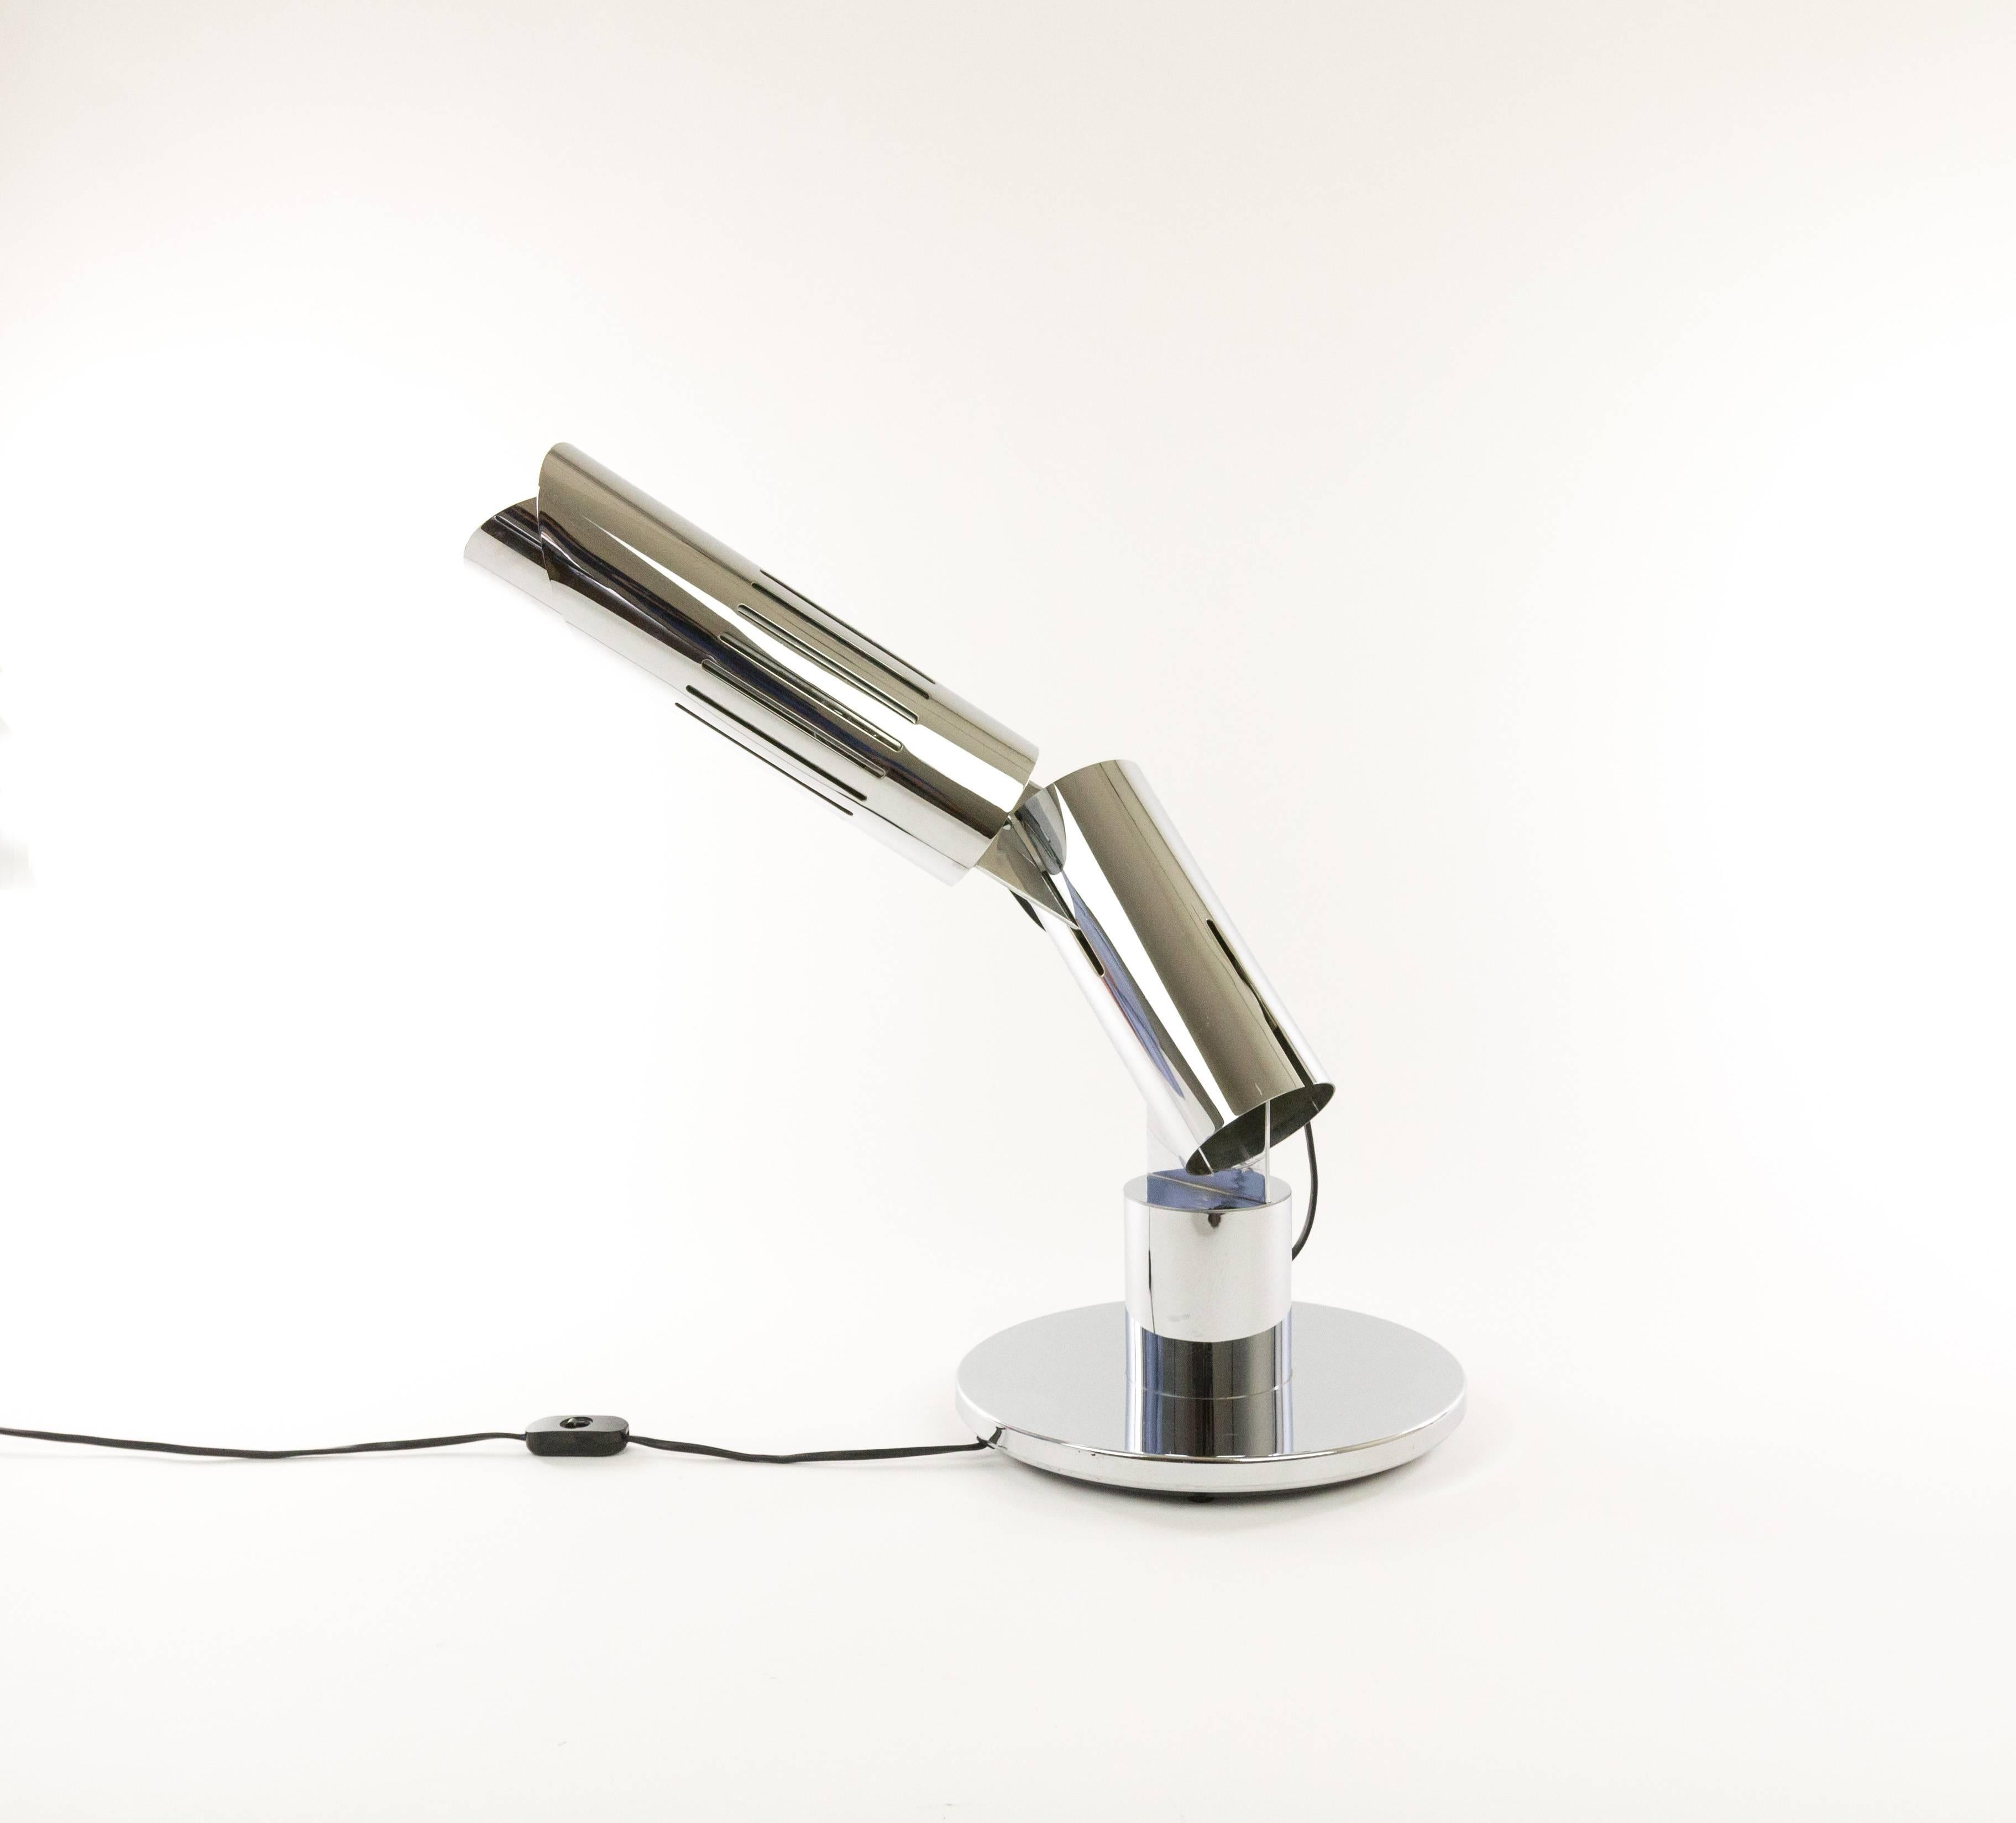 Chrome table lamp, model Cobra, designed by Gabriele D'ali in 1968 and produced by Francesconi.

This striking table lamp can be directed in every direction as the different chrome parts are connected by metal hinges. The rather heavy floor plate